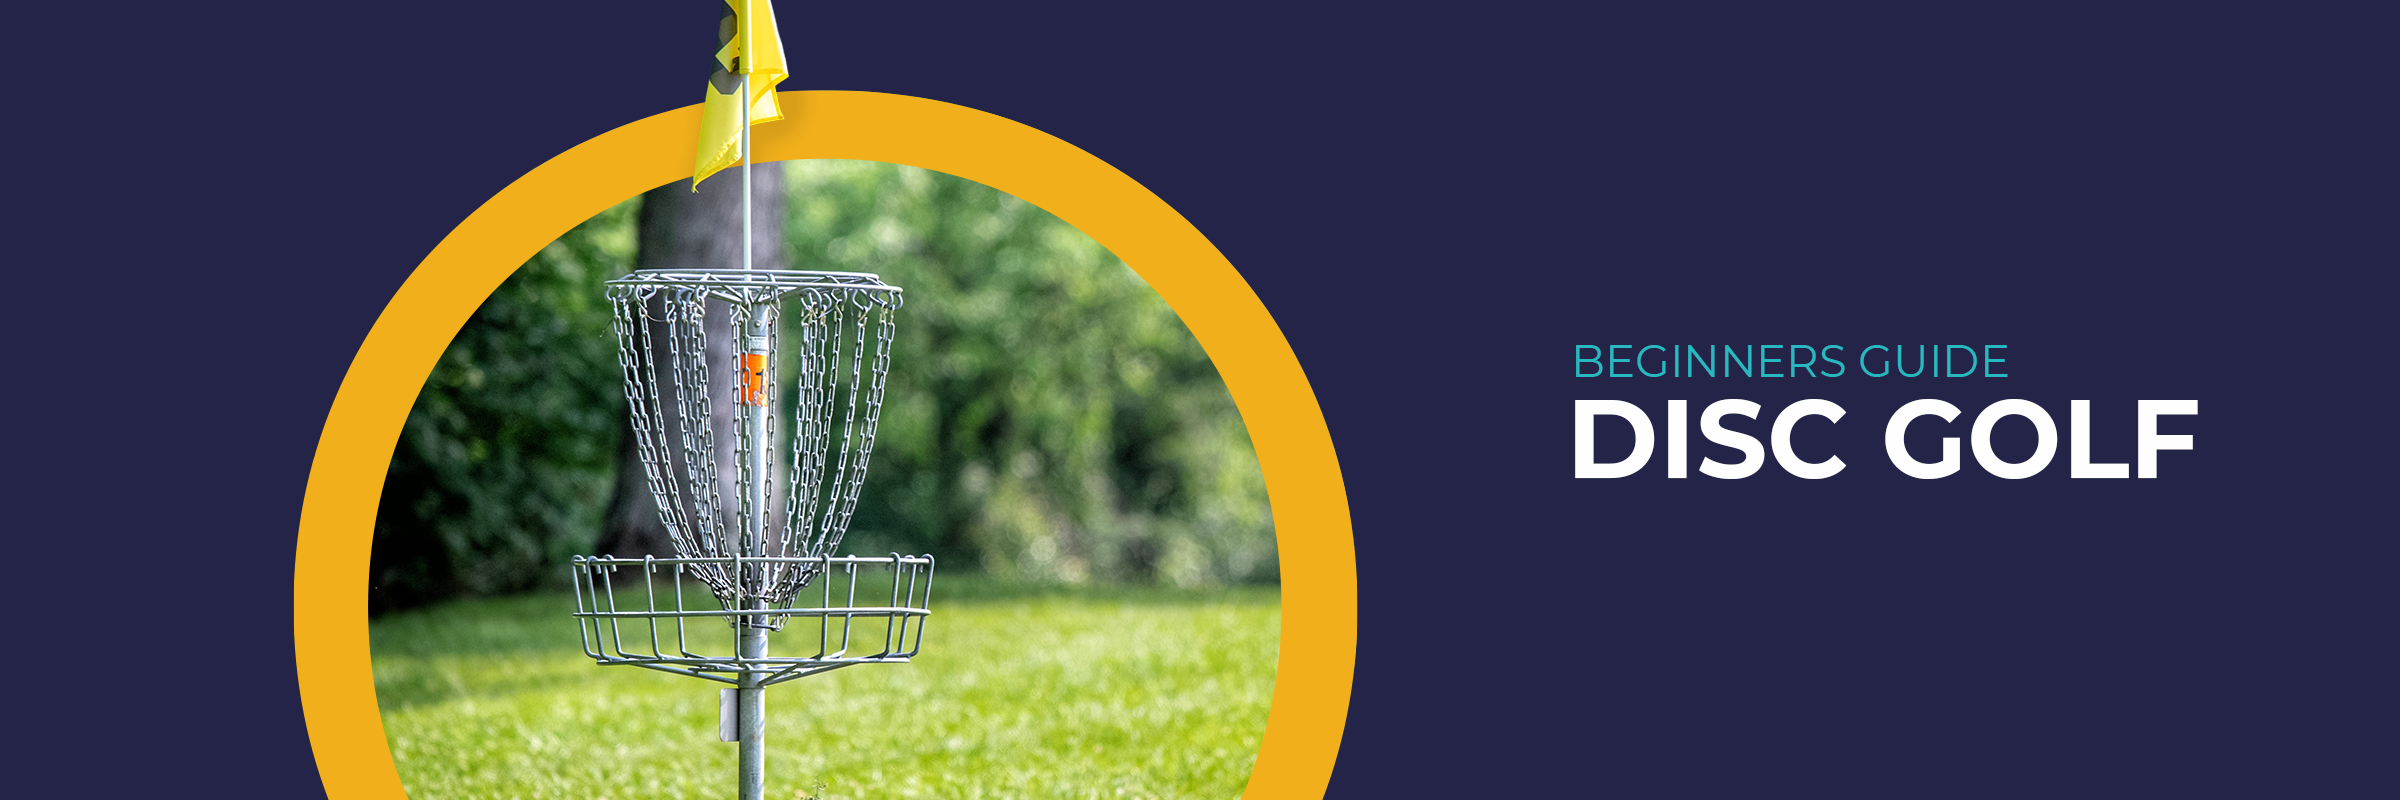 Beginners Guide to Disc Golf - What is Disc Golf? – SV SPORTS